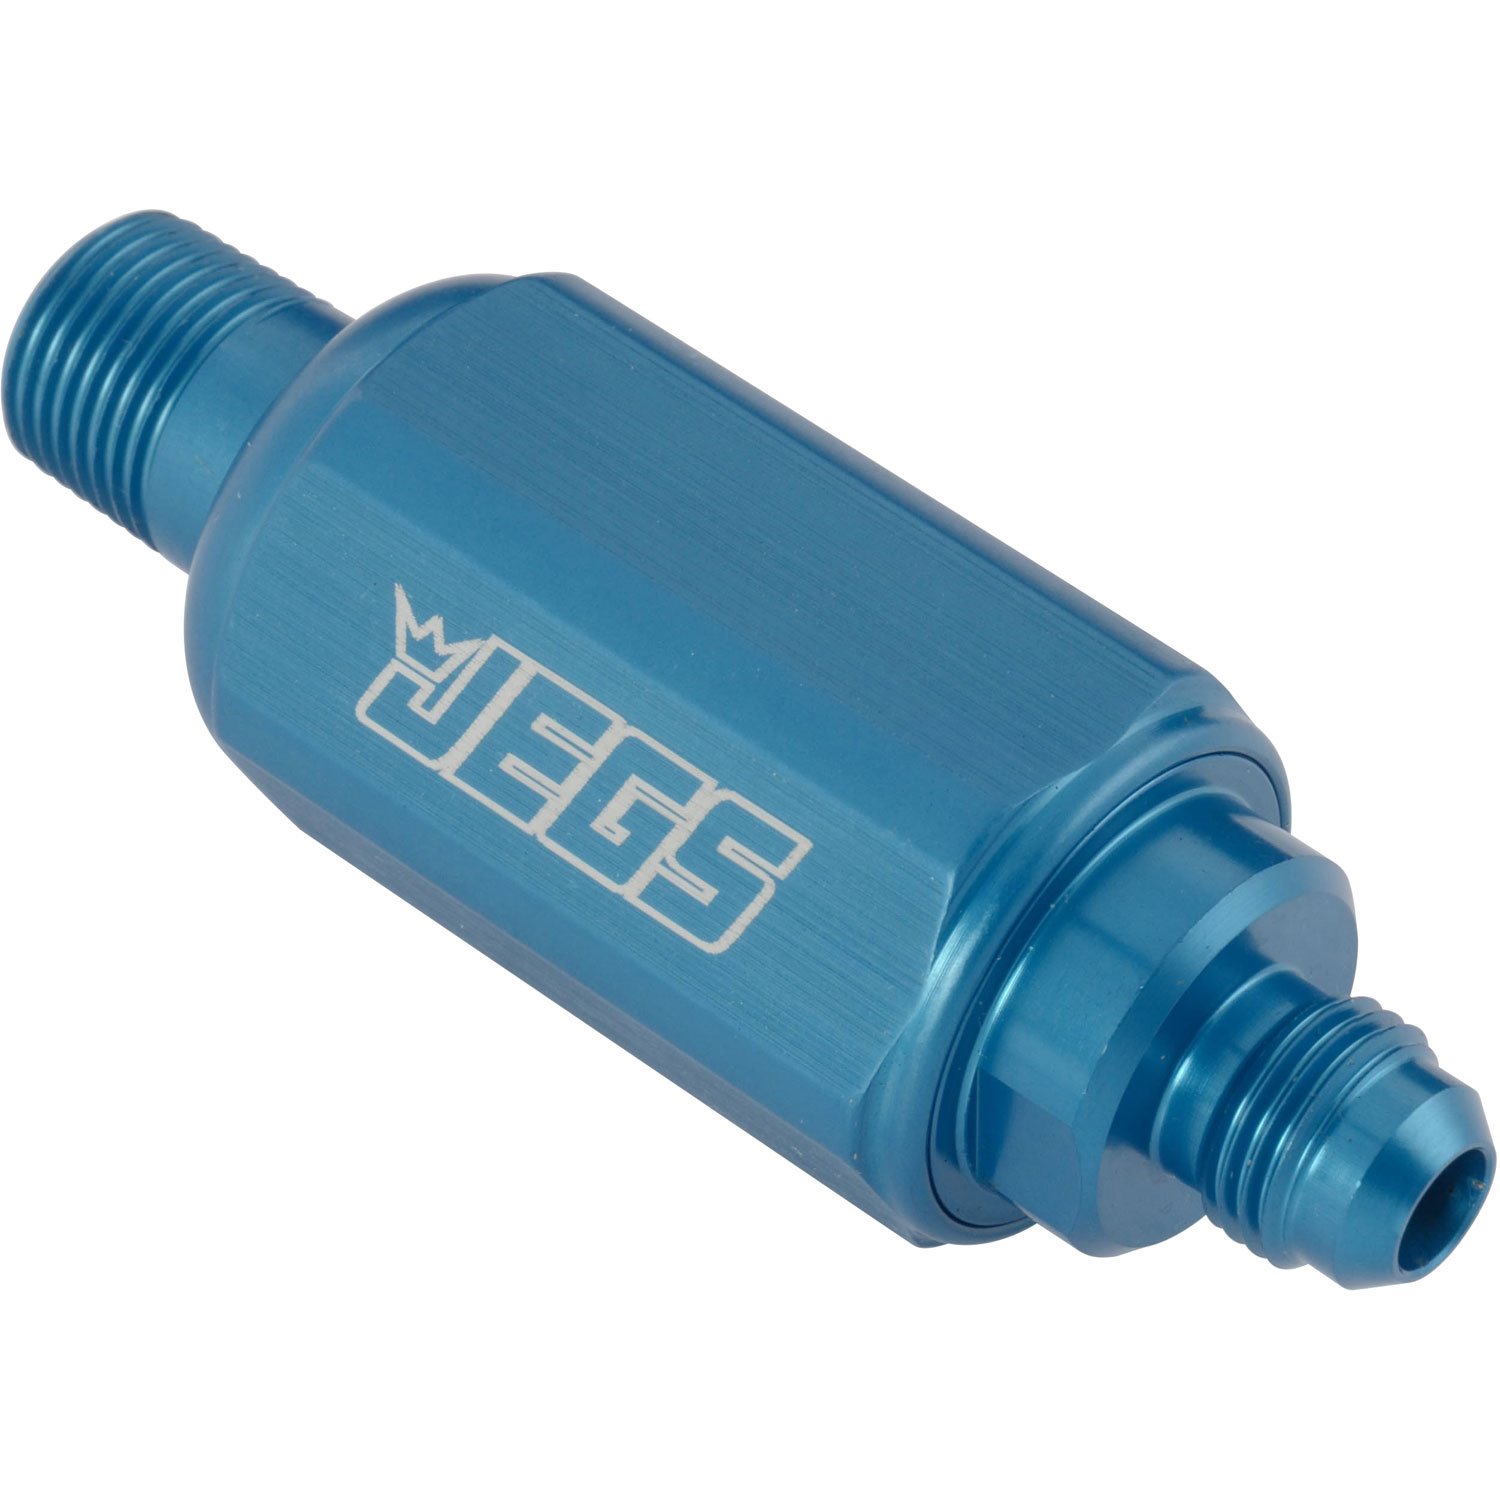 Compact Billet Aluminum In-Line Fuel Filter, 2 5/16 in. Long [3/8 in. NPT Male to -6 AN Male, Blue]